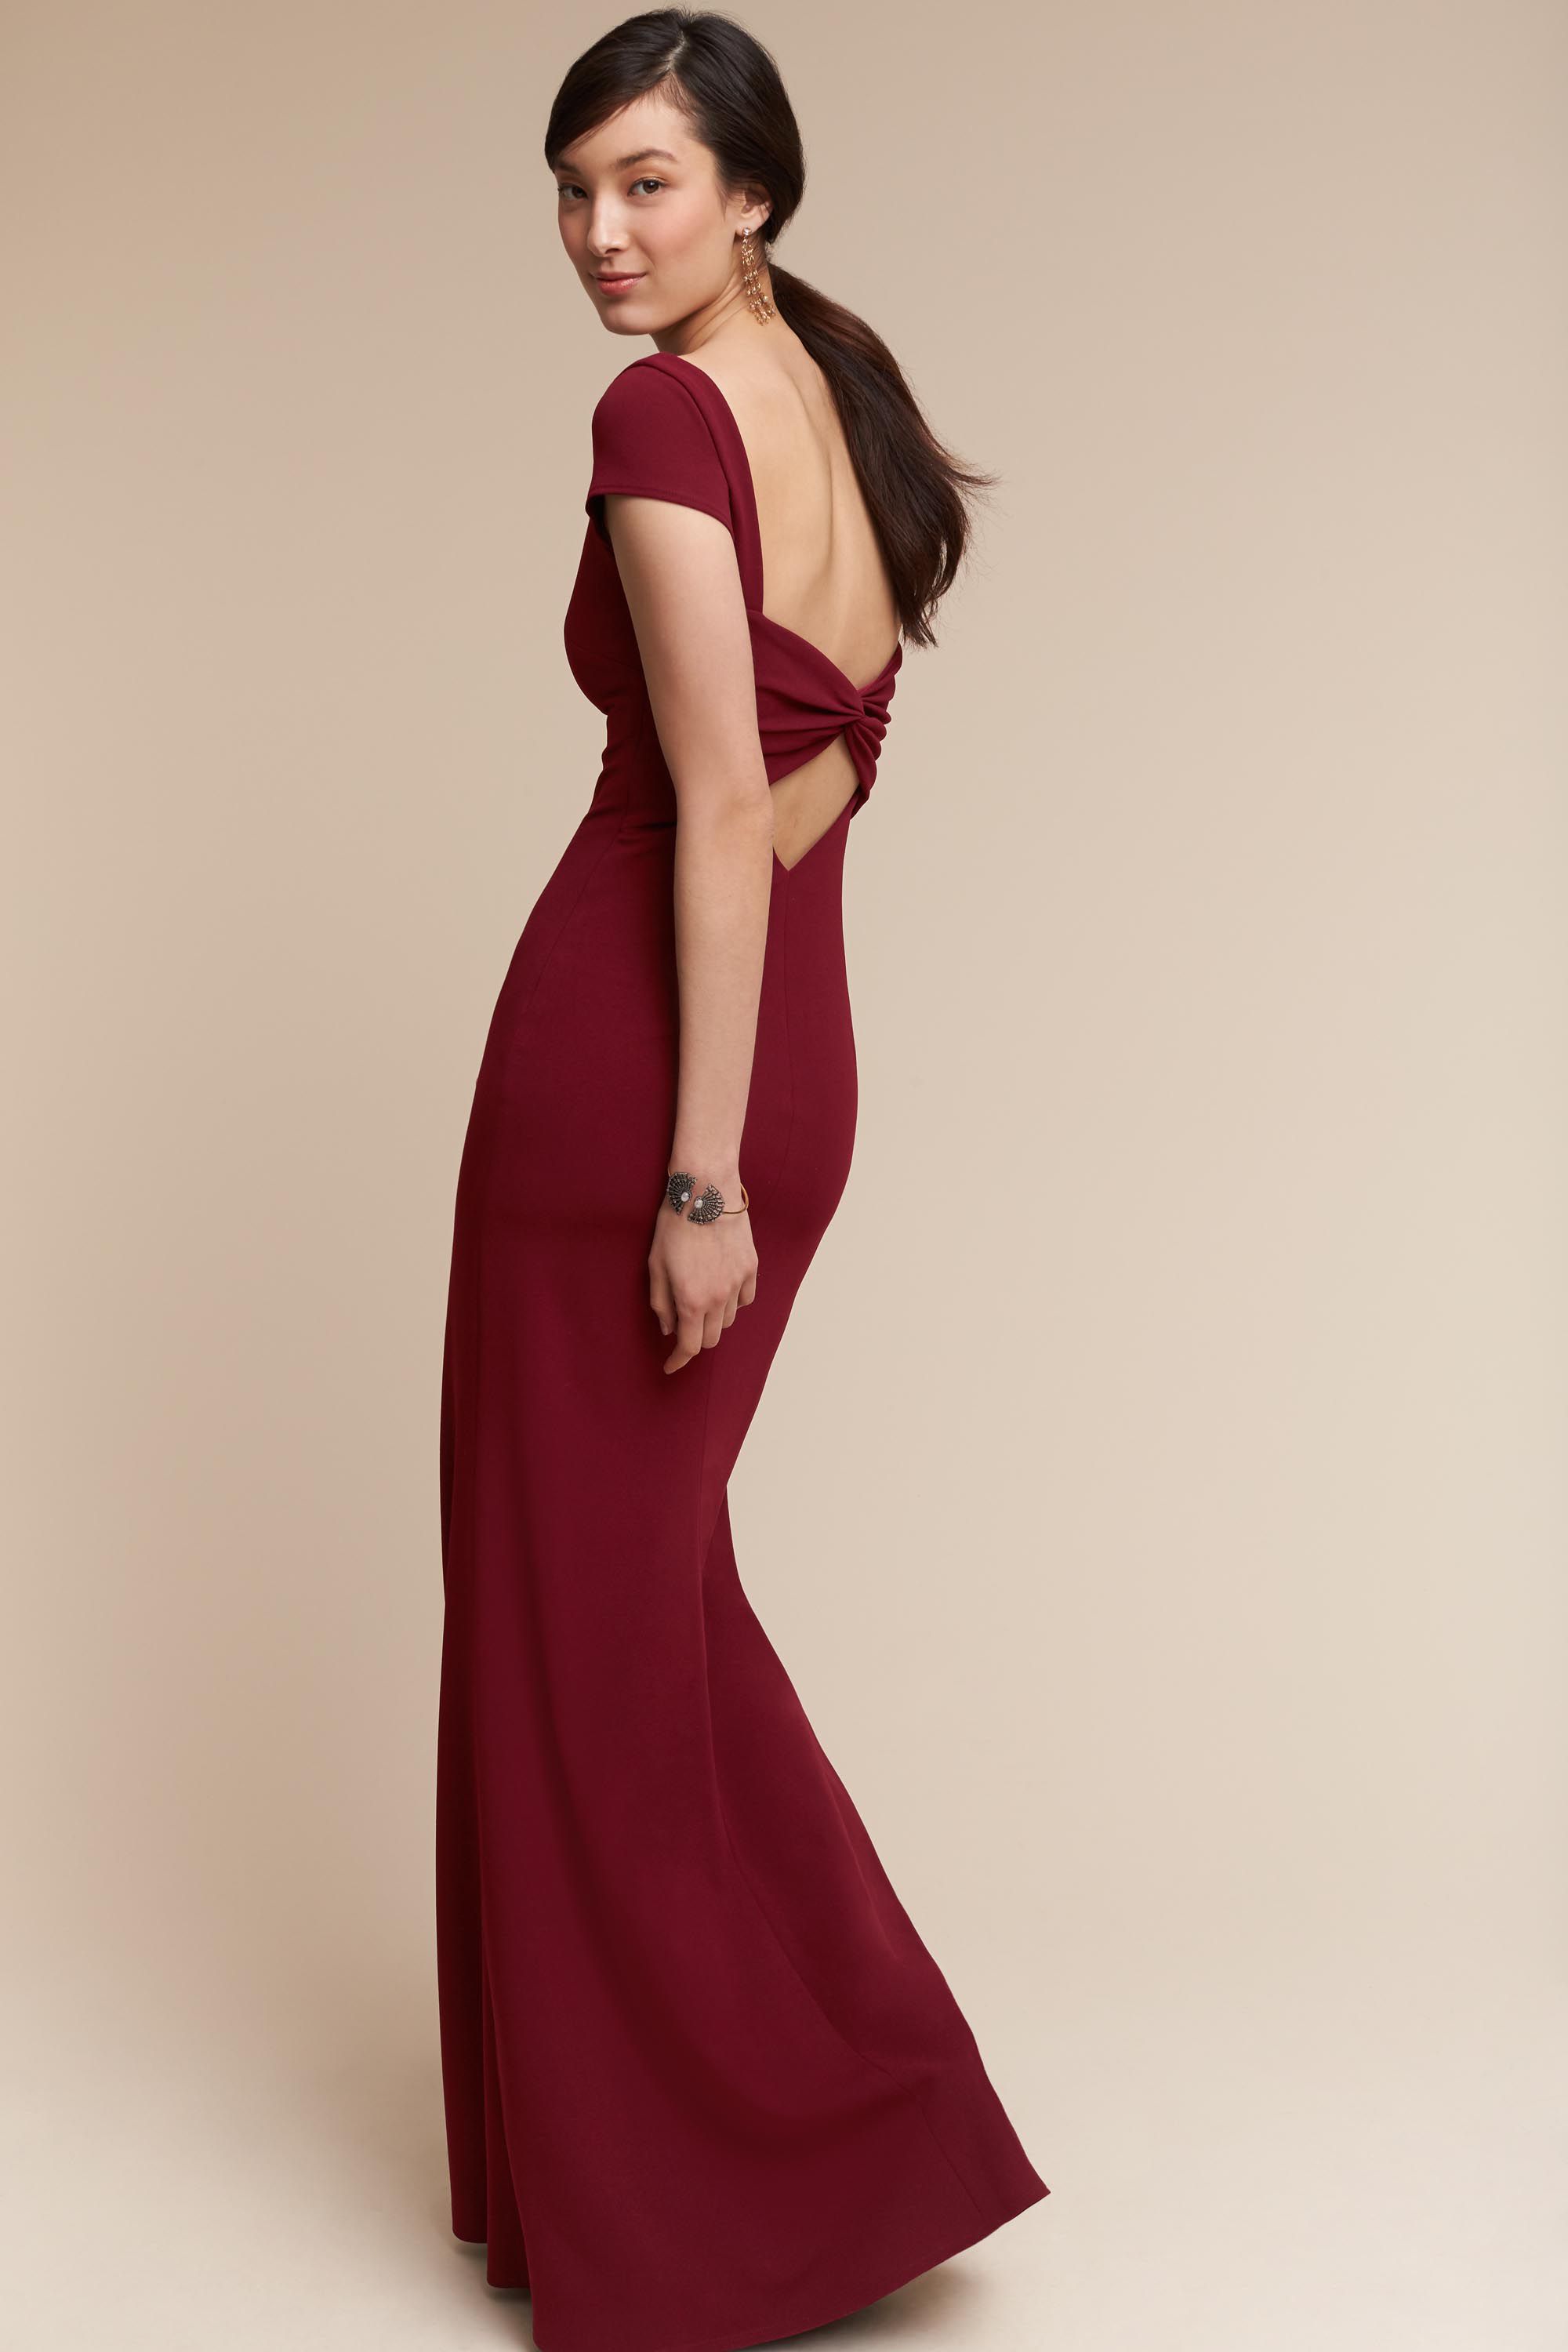 NEW $280 BHLDN Katie May Madison Dress Gown in Bordeaux 